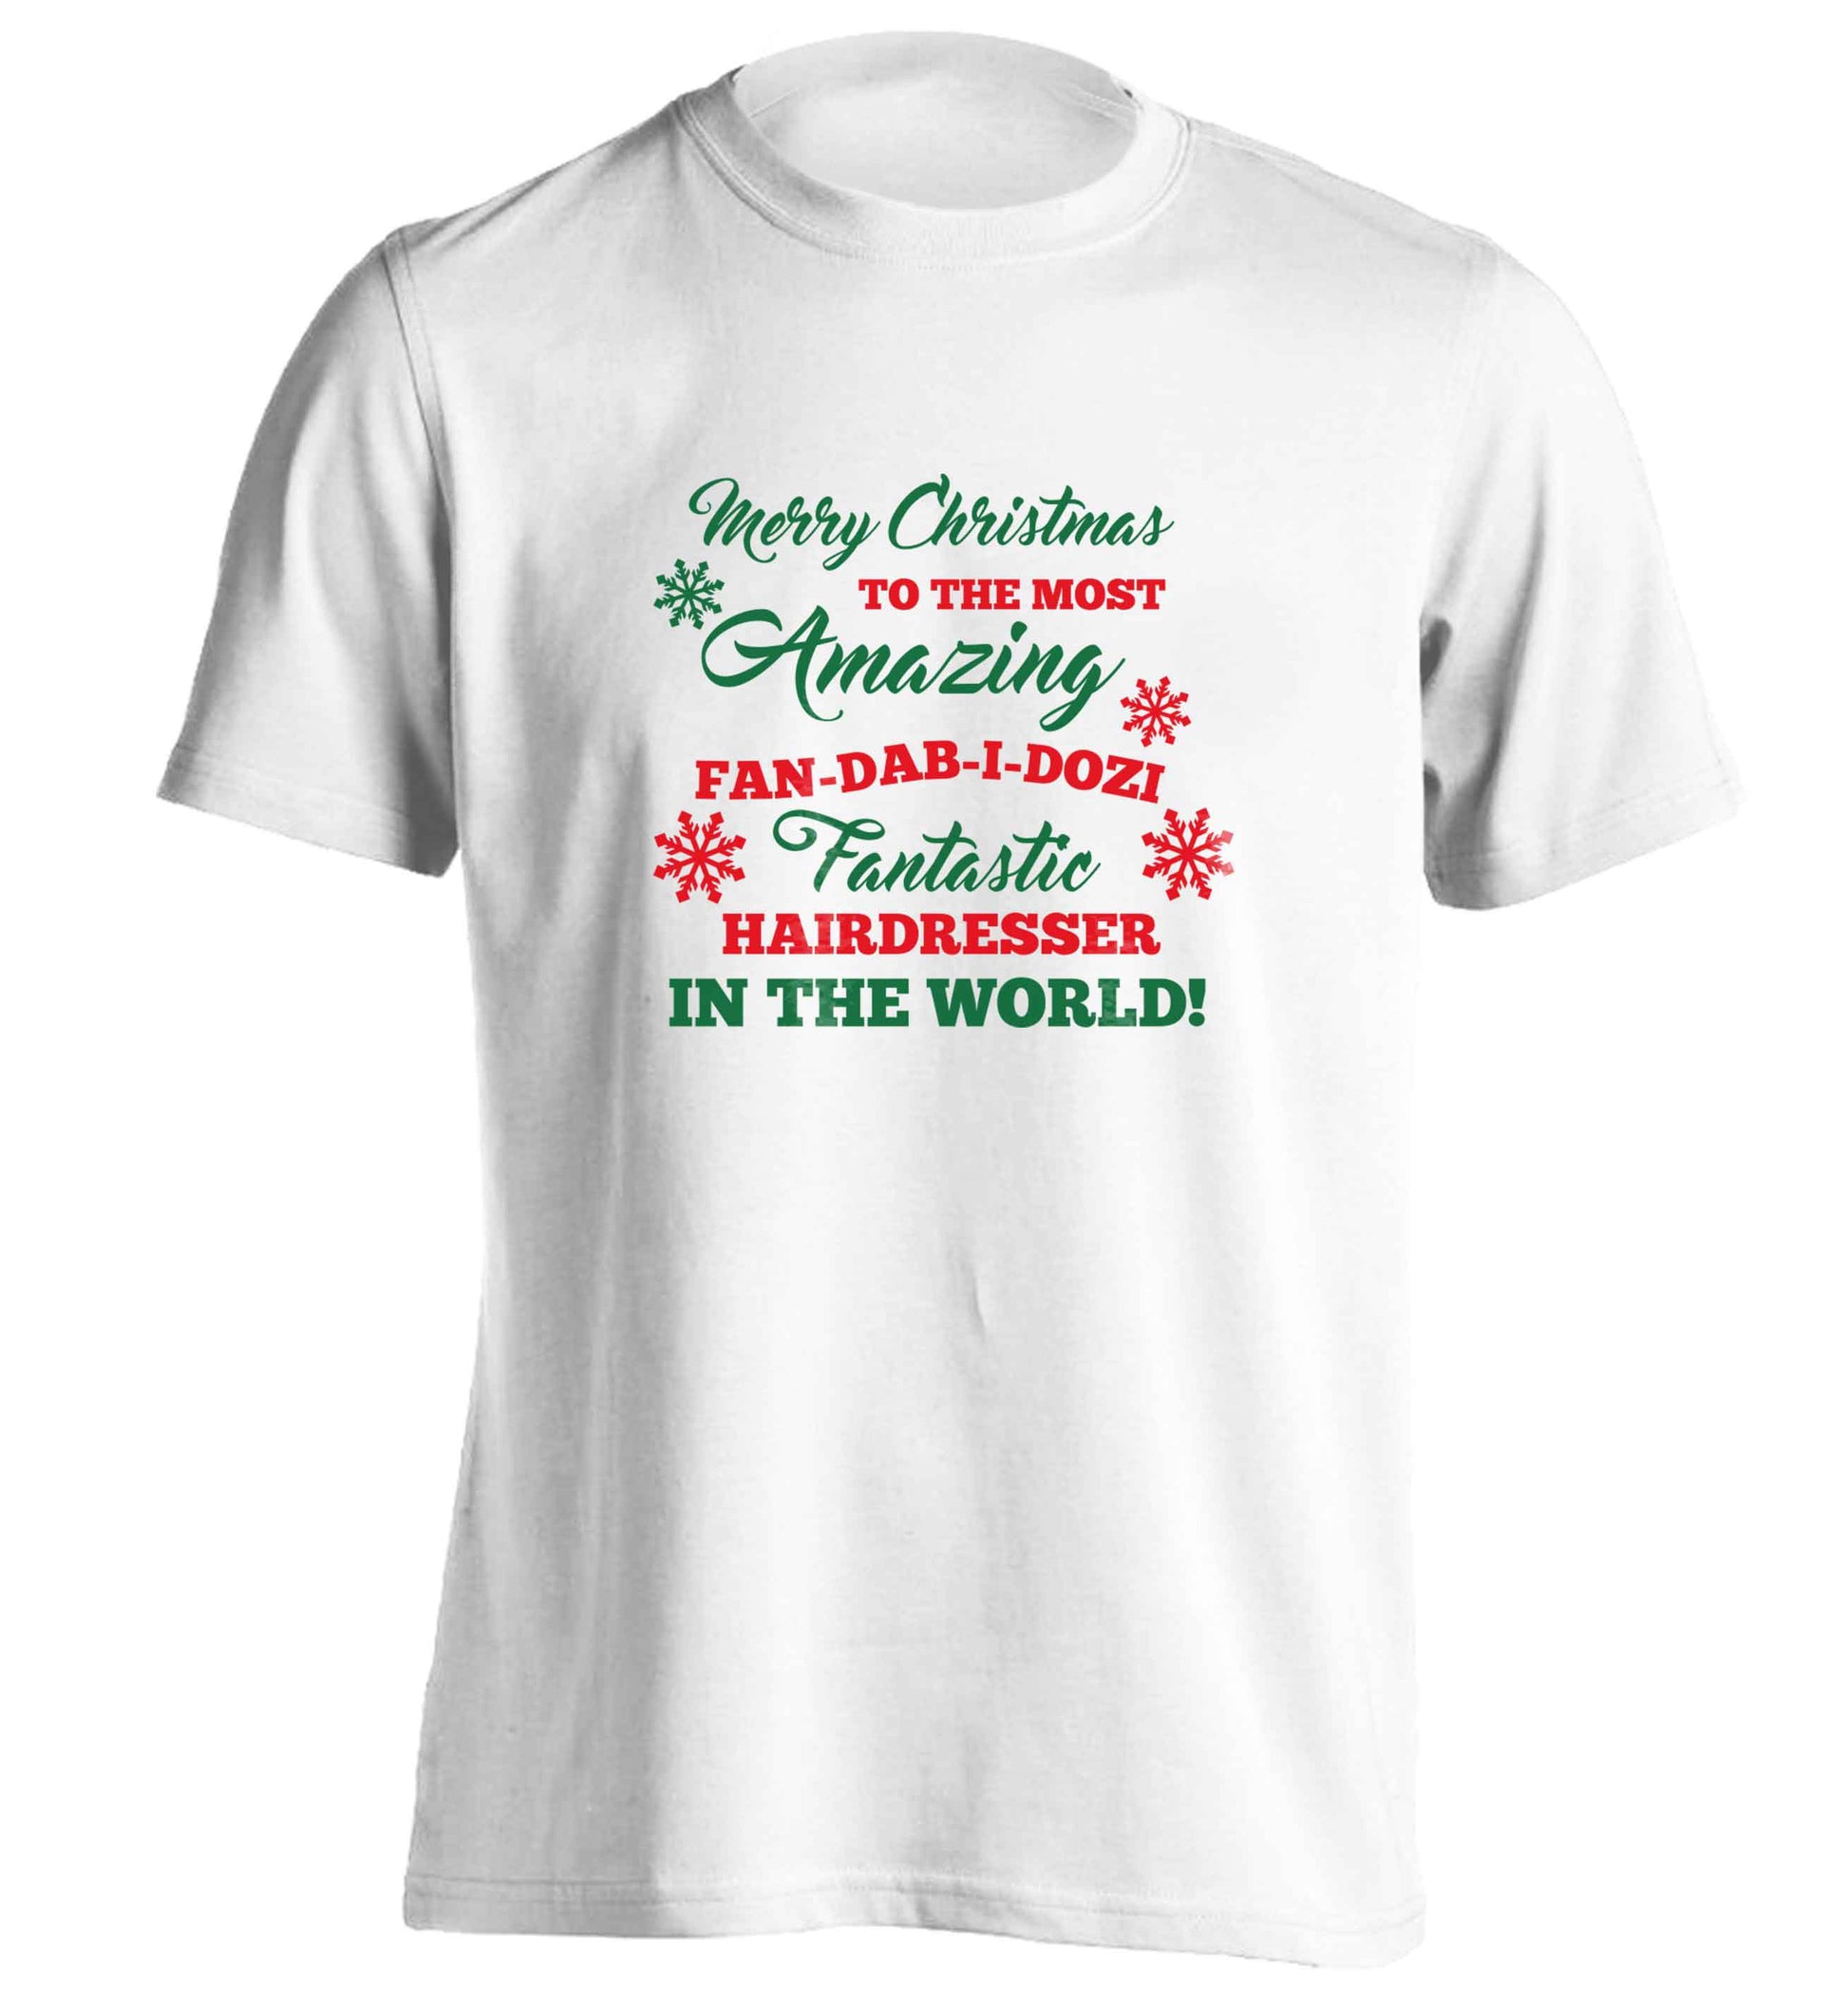 Merry Christmas to the most amazing dental assistant in the world! adults unisex white Tshirt 2XL